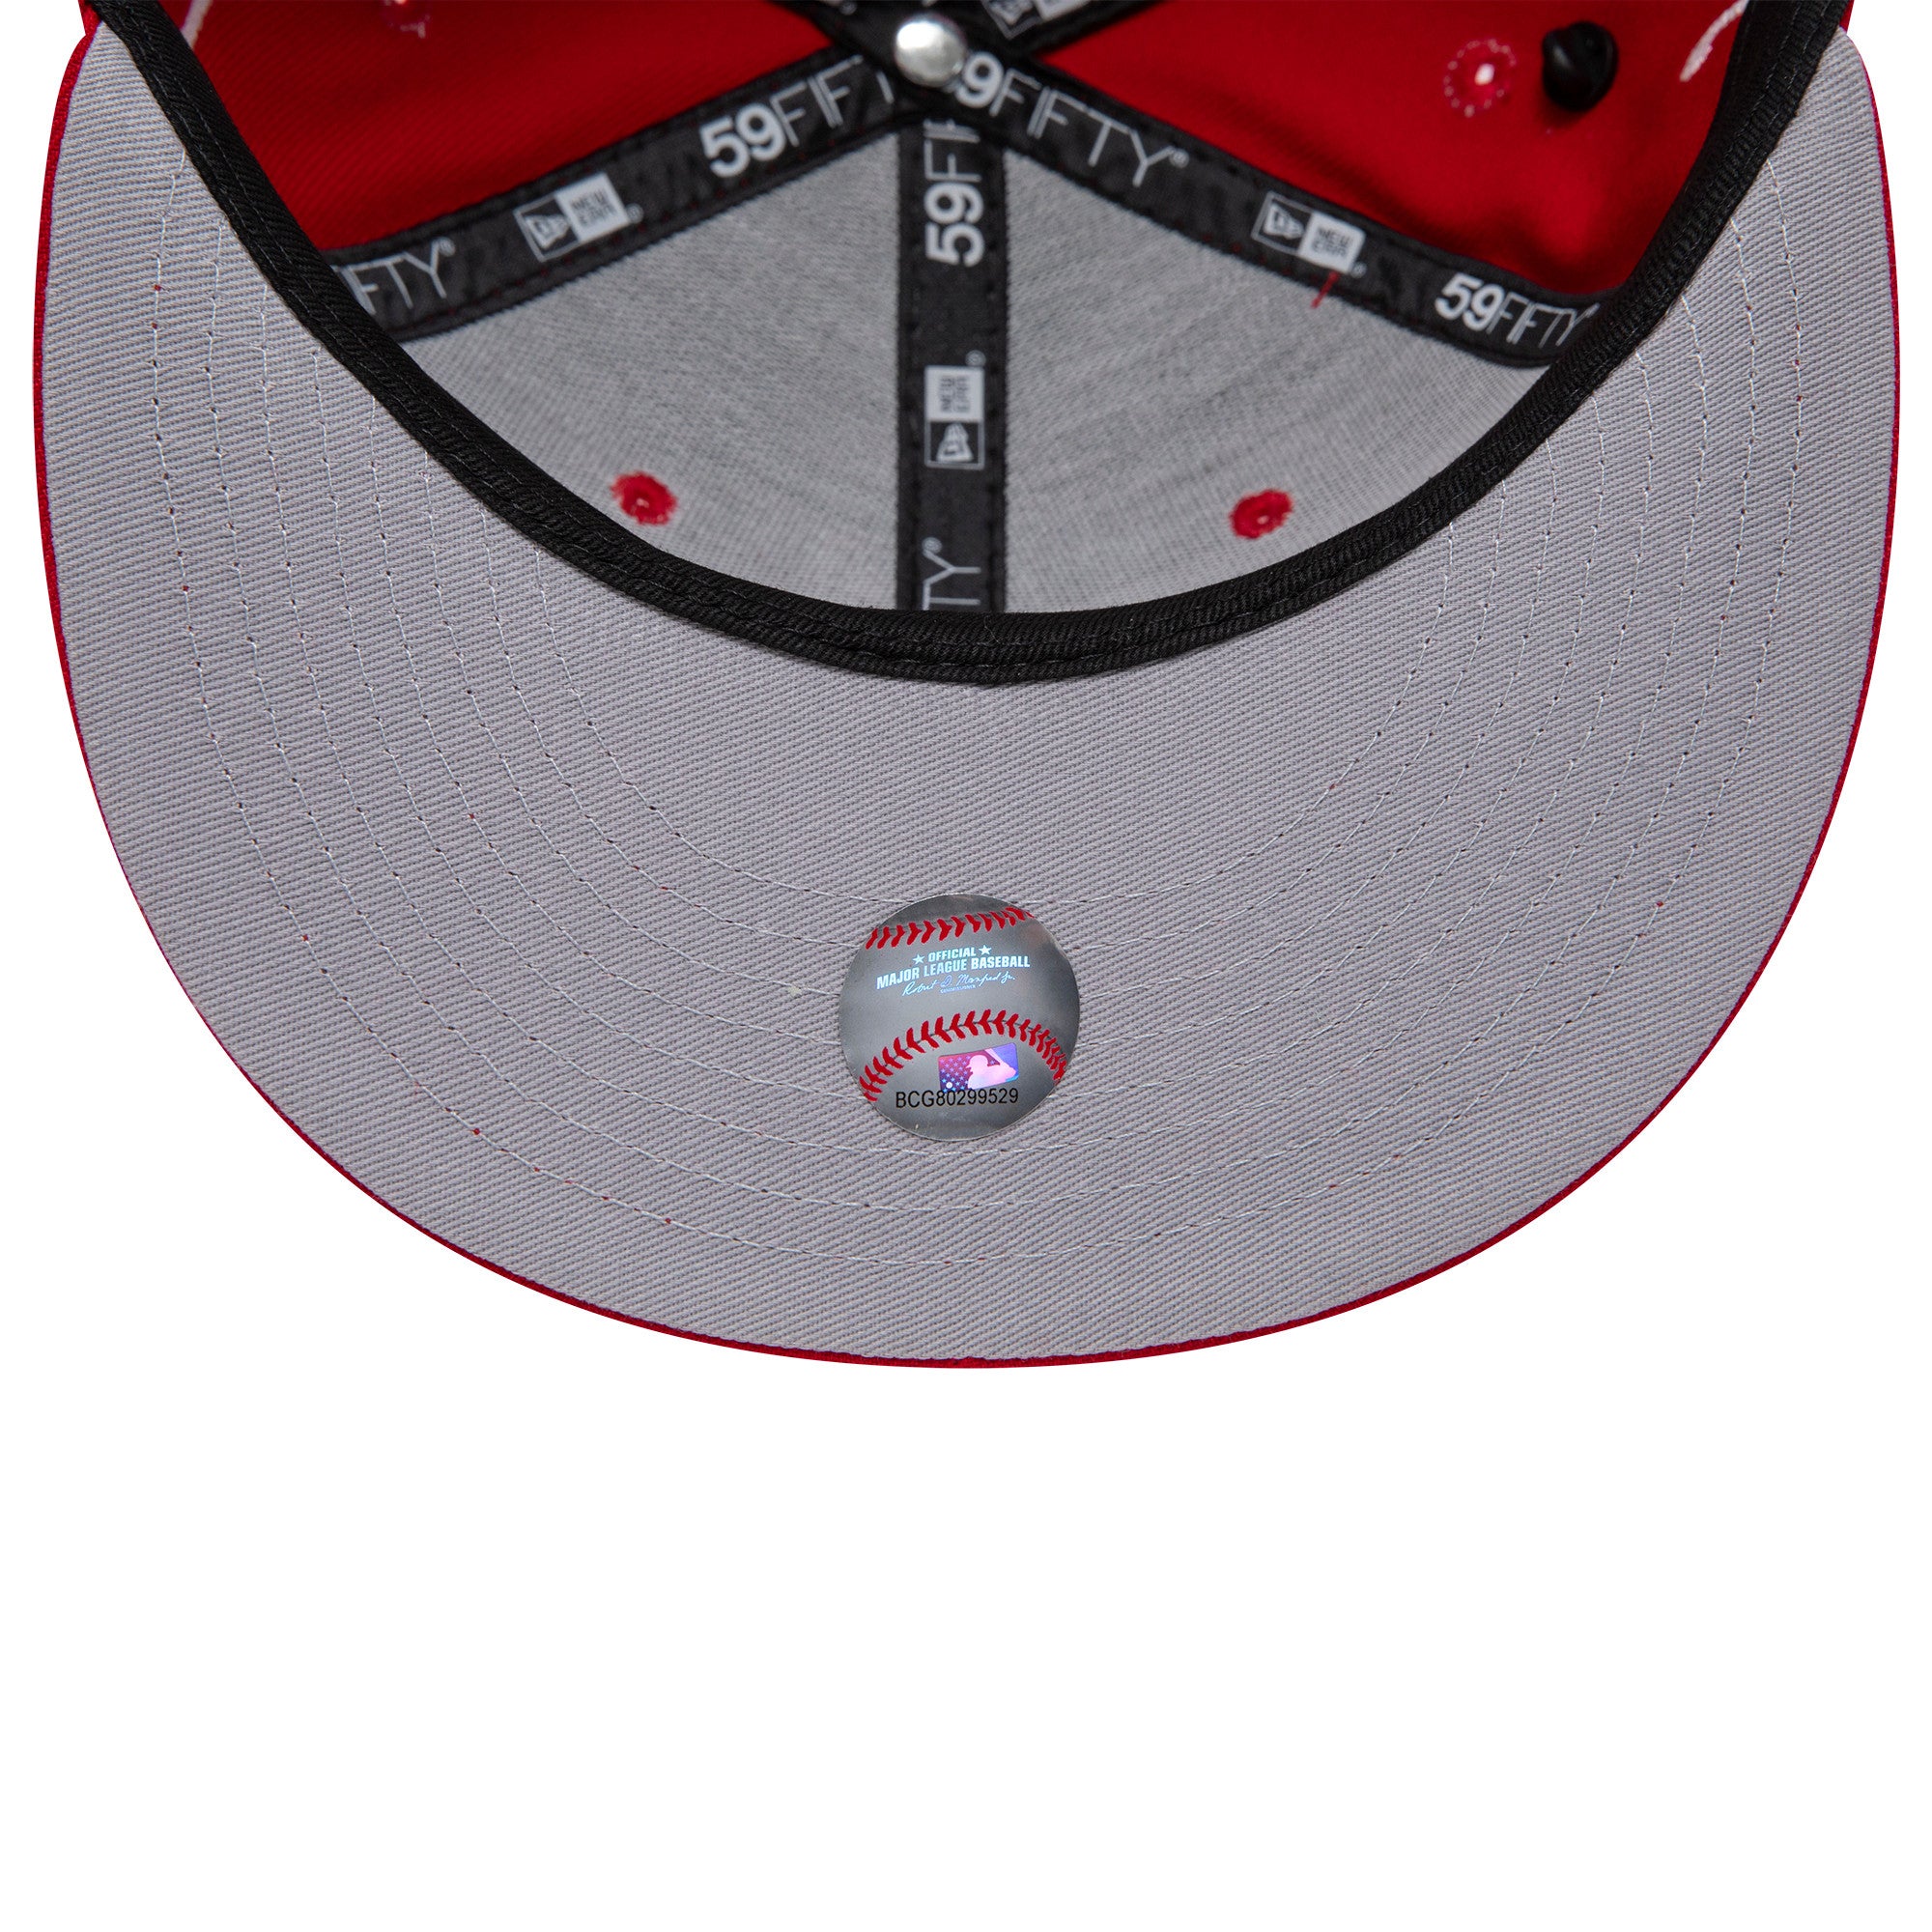 HISTORIC CHAMPS 59Fifty Fitted Cap Cincinnati Reds - Red - Headz Up 